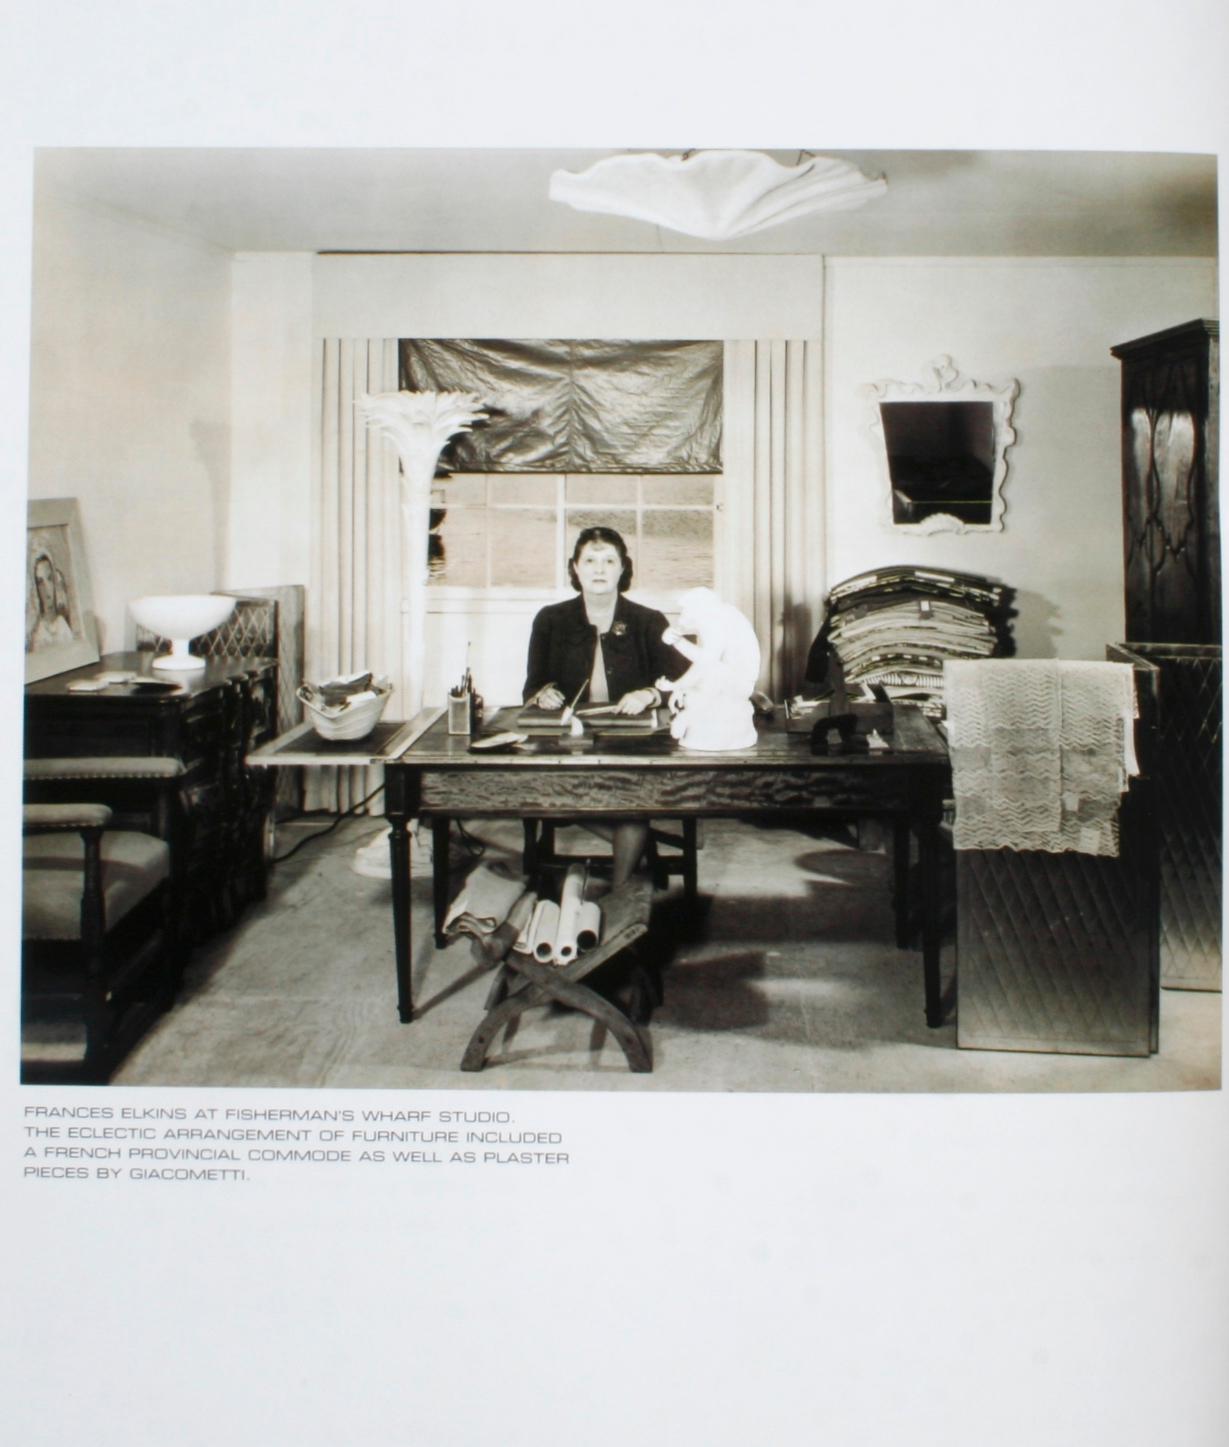 Frances Elkins: Interior Design by Stephen Salny, Forward by Albert Hadley. Stated first edition hardcover with dust jacket. 208 pp. An avant-garde decorator and arbiter of taste, she was celebrated for inspired designs that integrated various